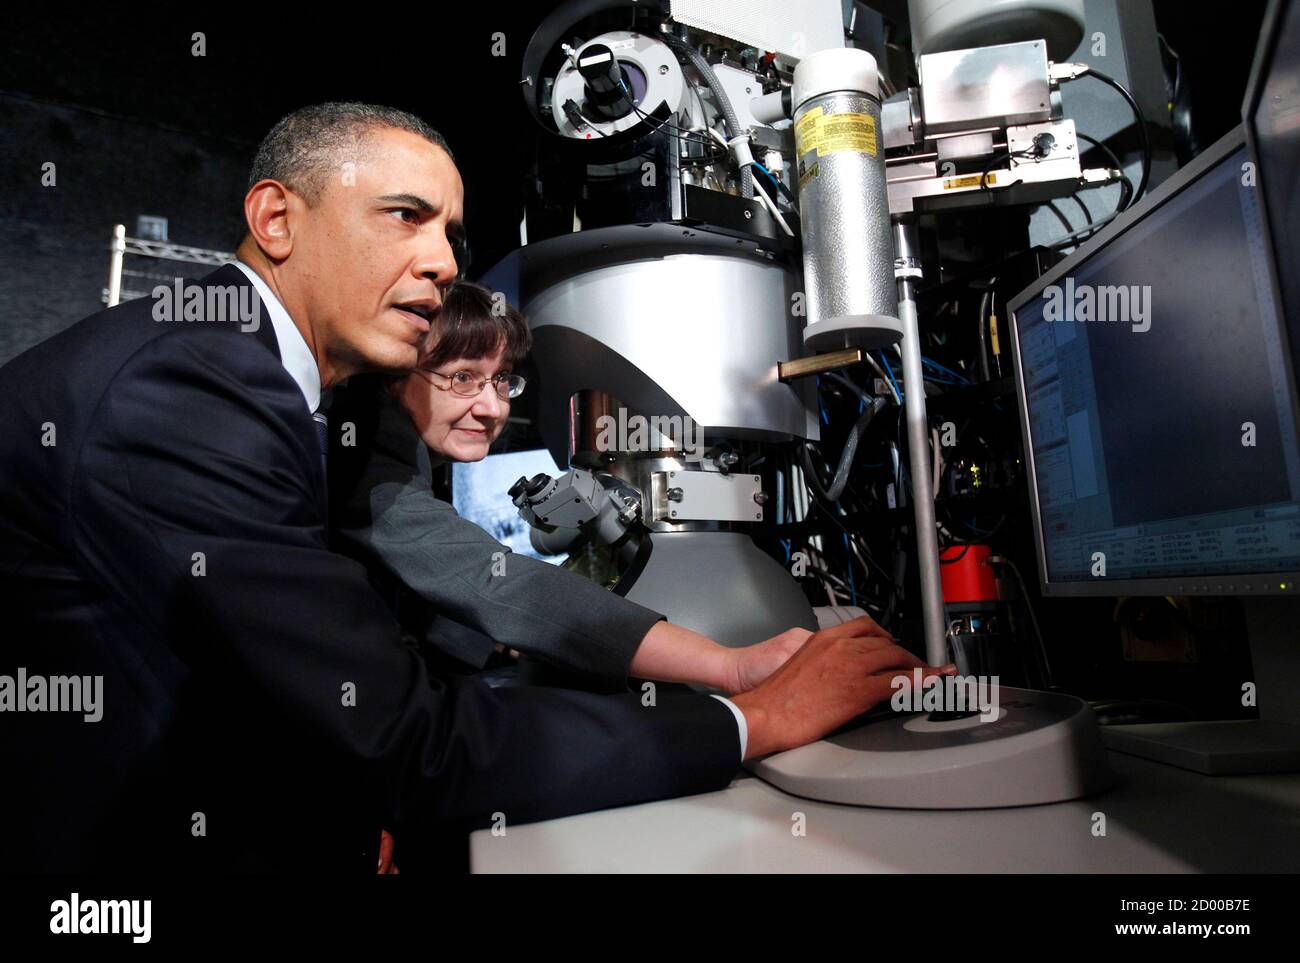 U.S. President Barack Obama (L) looks at a screen next to Intel's Transmission Electron Microscope during a tour of the semiconductor manufacturing facility at Intel Corporation in Hillsboro, Oregon February 18, 2011.  Pictured with Obama is telescope lab manager Barbara Miner.   REUTERS/Kevin Lamarque (UNITED STATES - Tags: POLITICS BUSINESS) Stock Photo